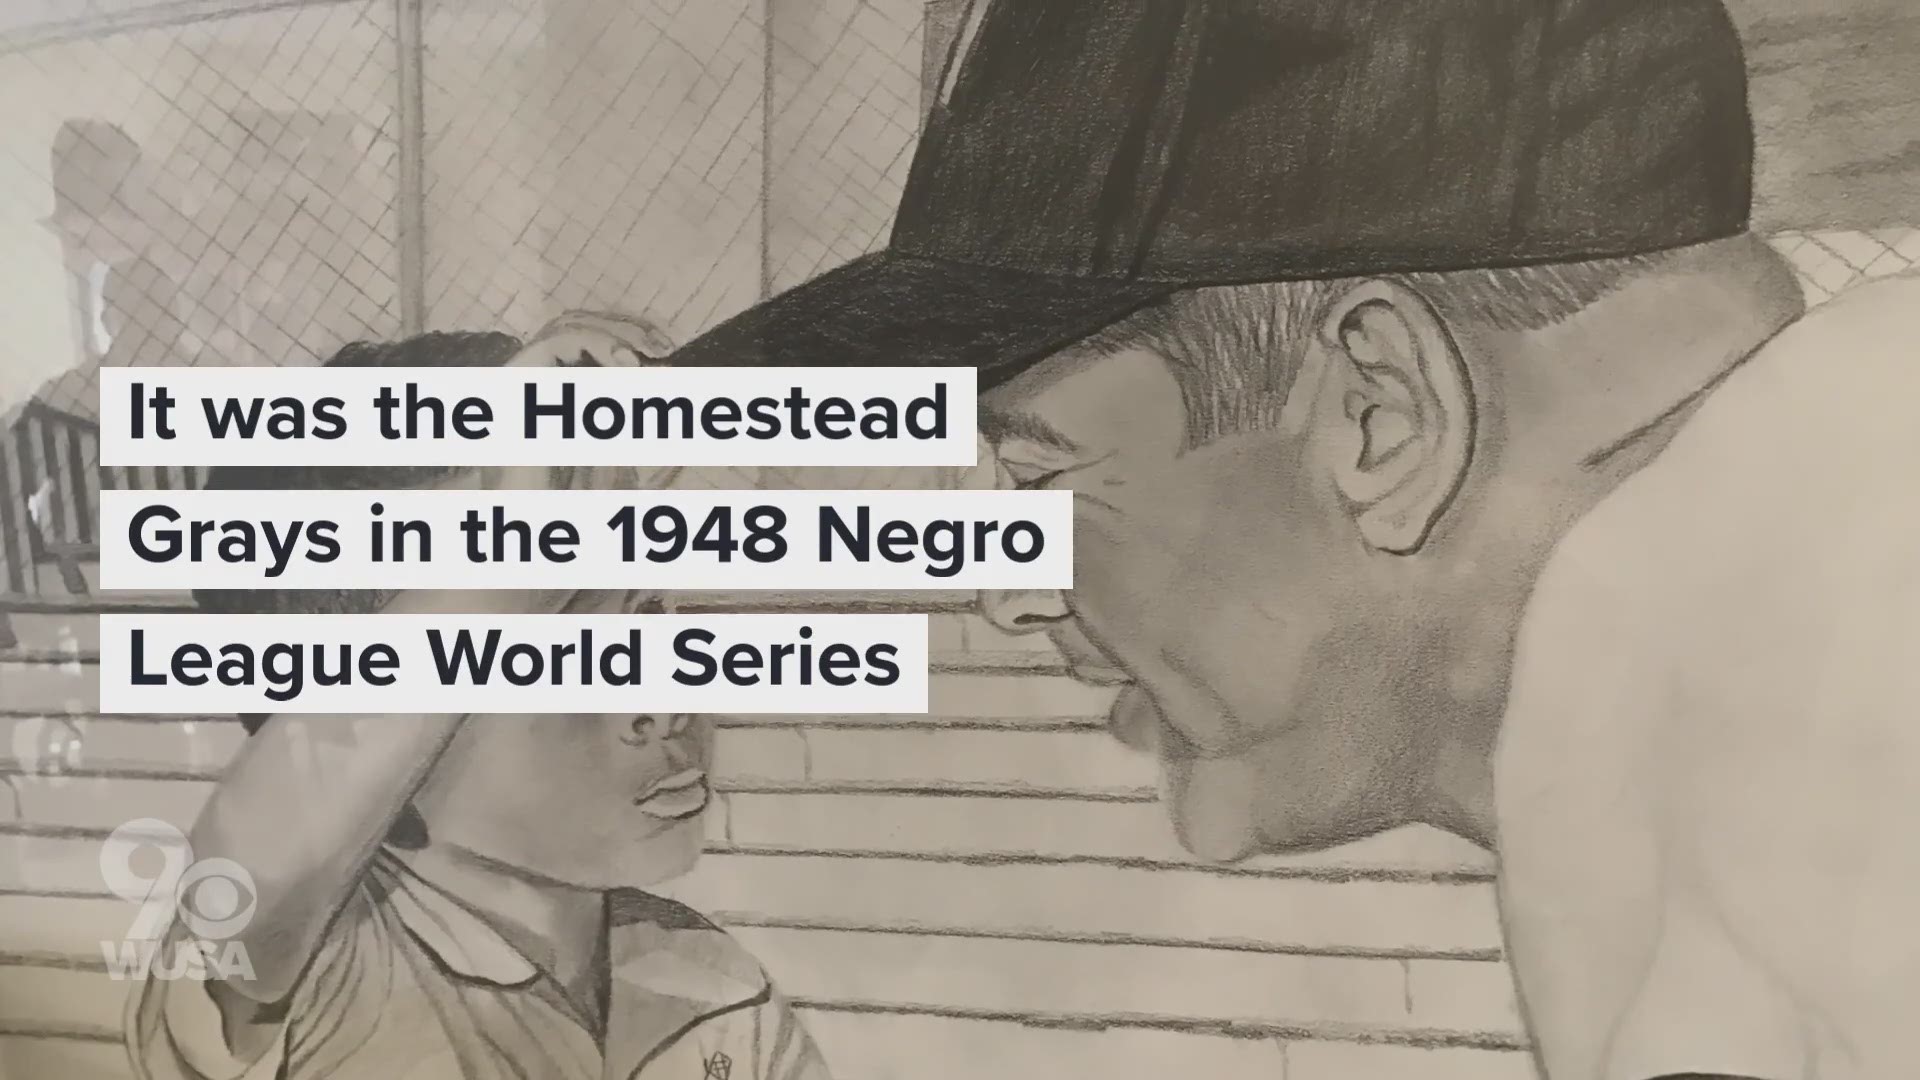 The Homestead Grays were the last D.C. team to win a World Series championship.